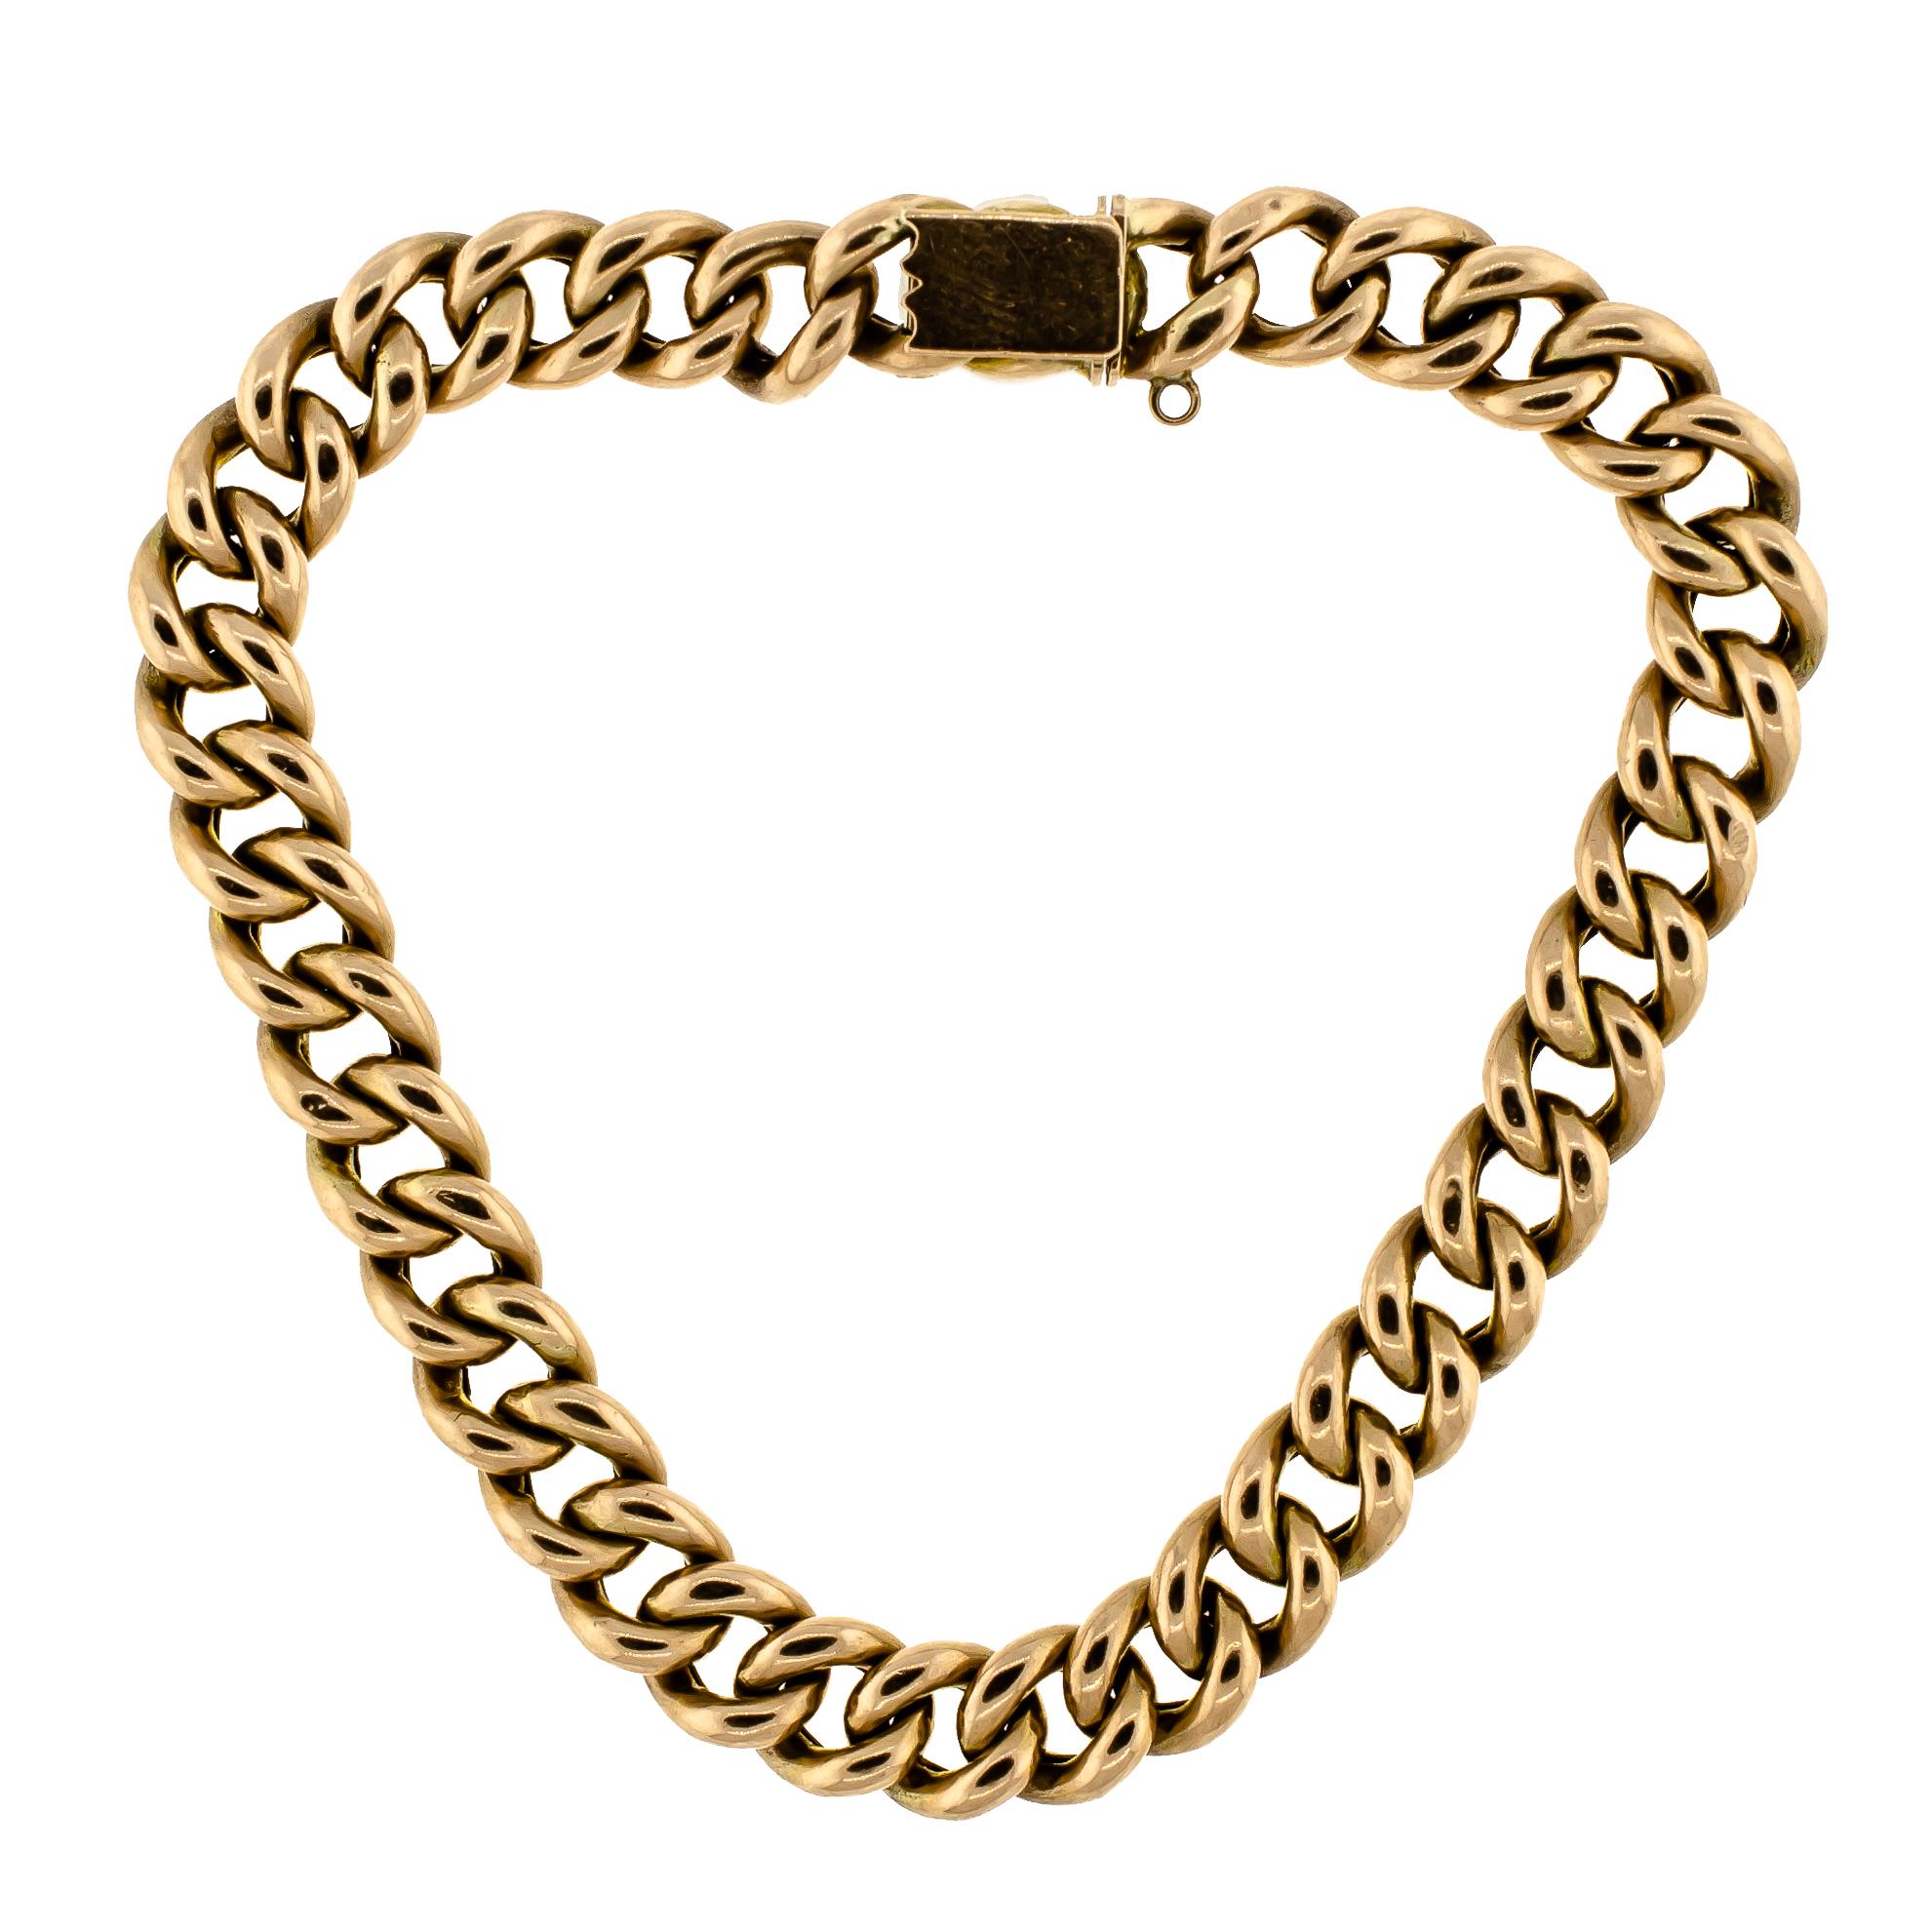 This antique English curb link bracelet has been crafted in 9ct yellow gold and dates back to the last turn-of-the-century. Thirty-seven hollow beautiful curb links and a concealed box link clasp make up this attractive bracelet. The tongue of the